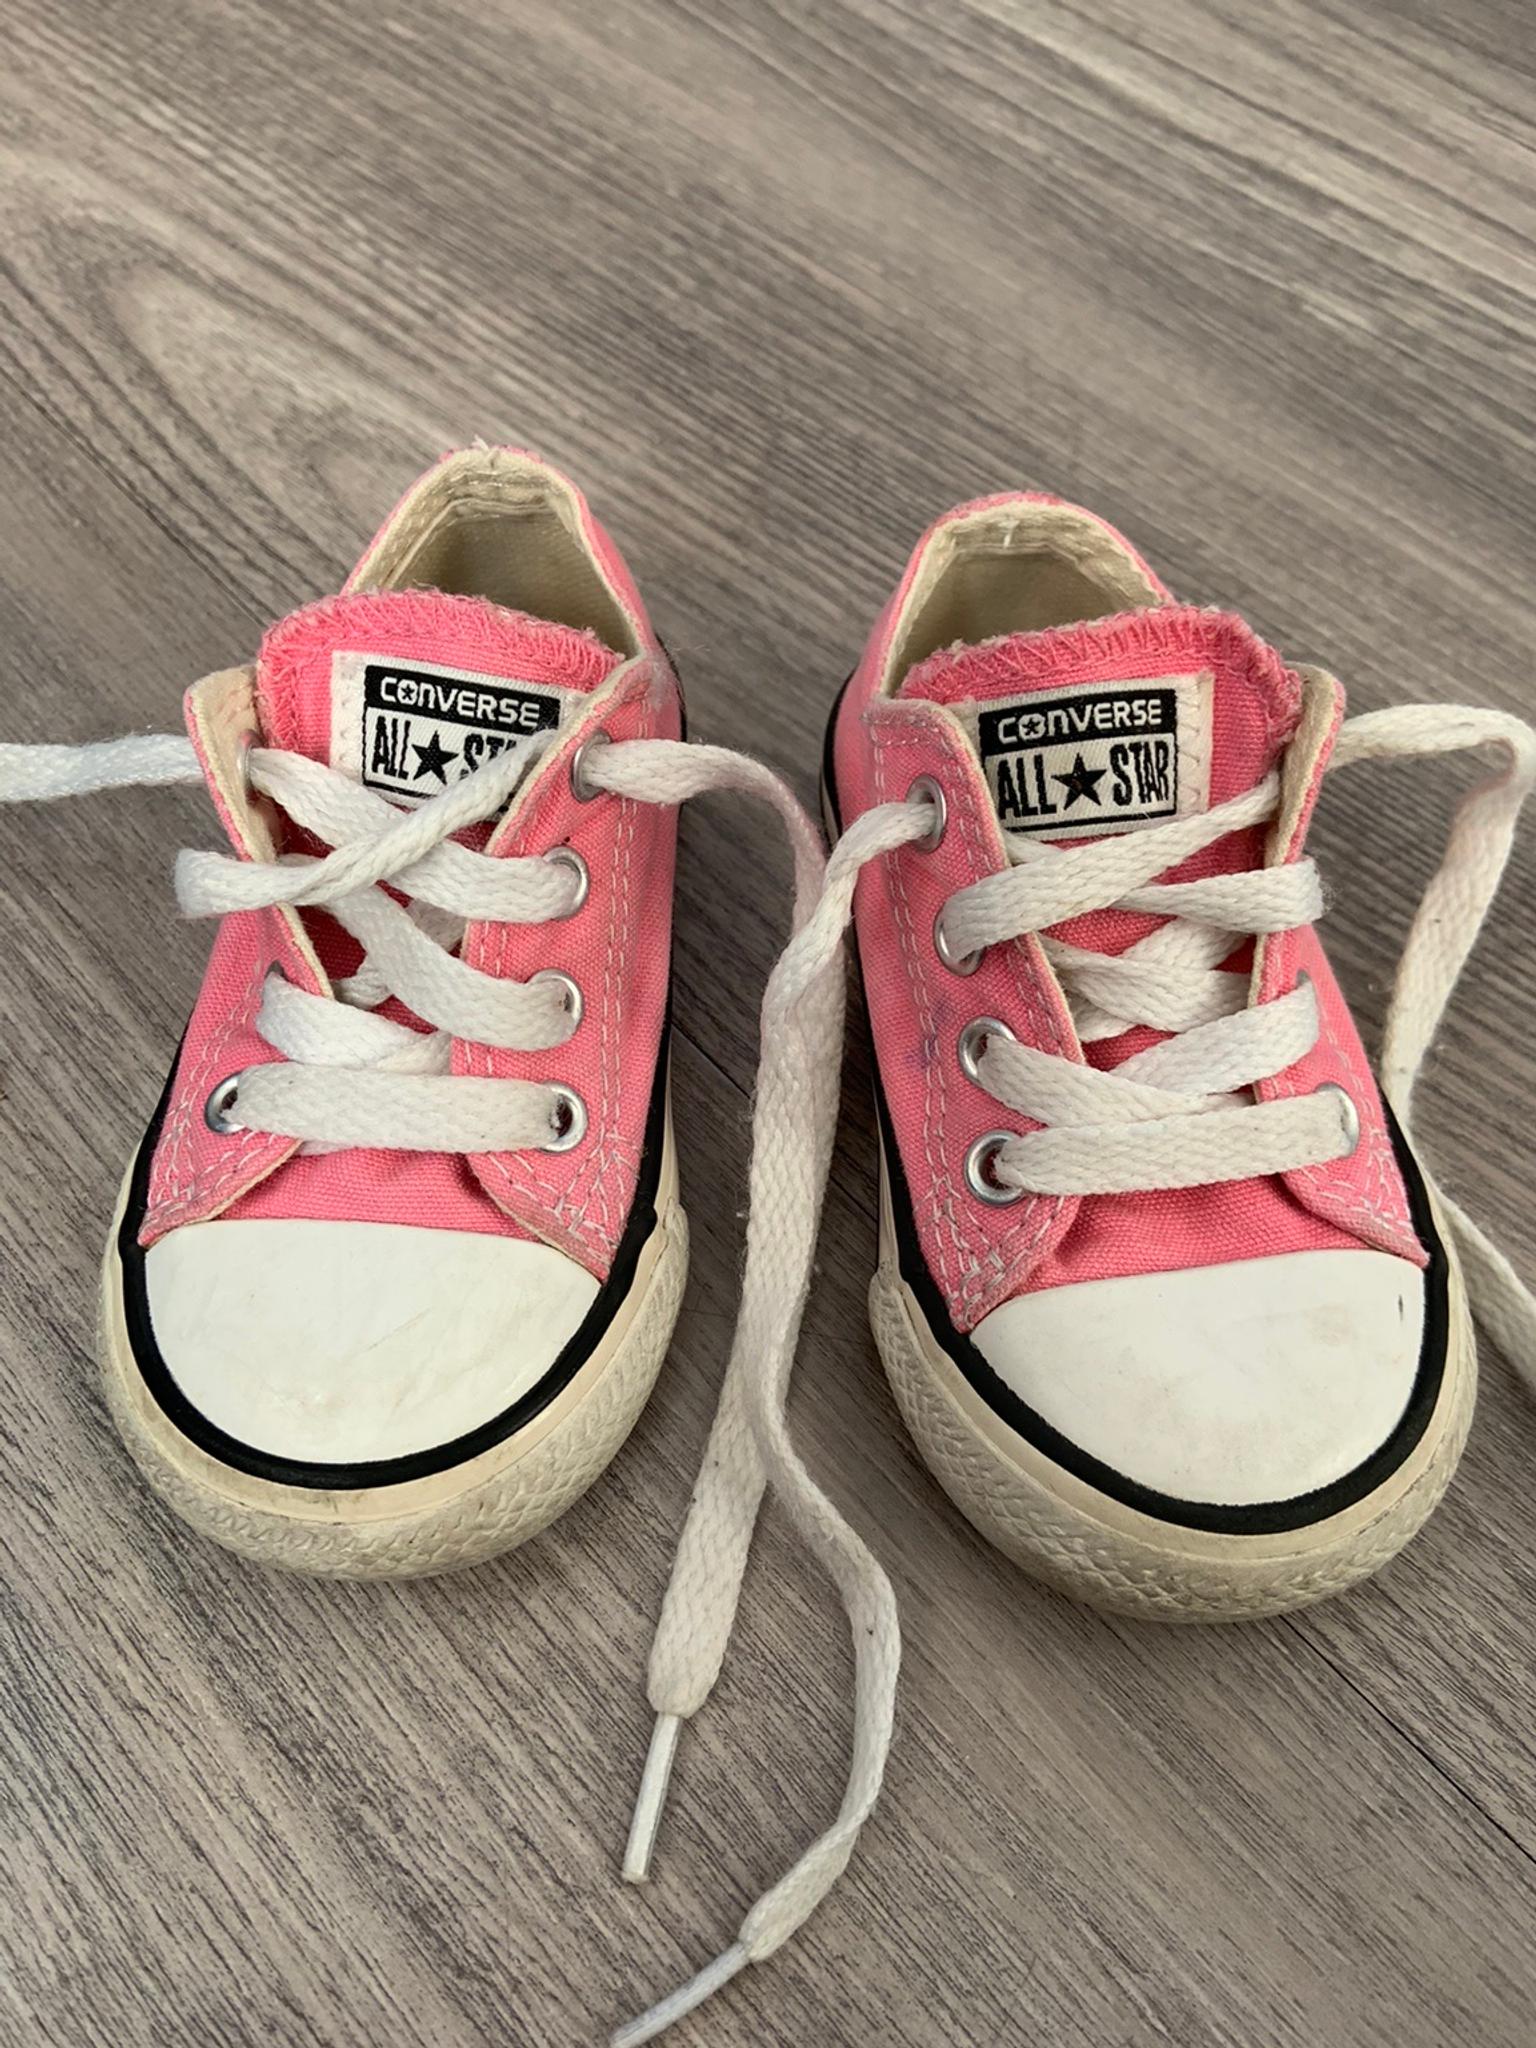 youth converse size 4